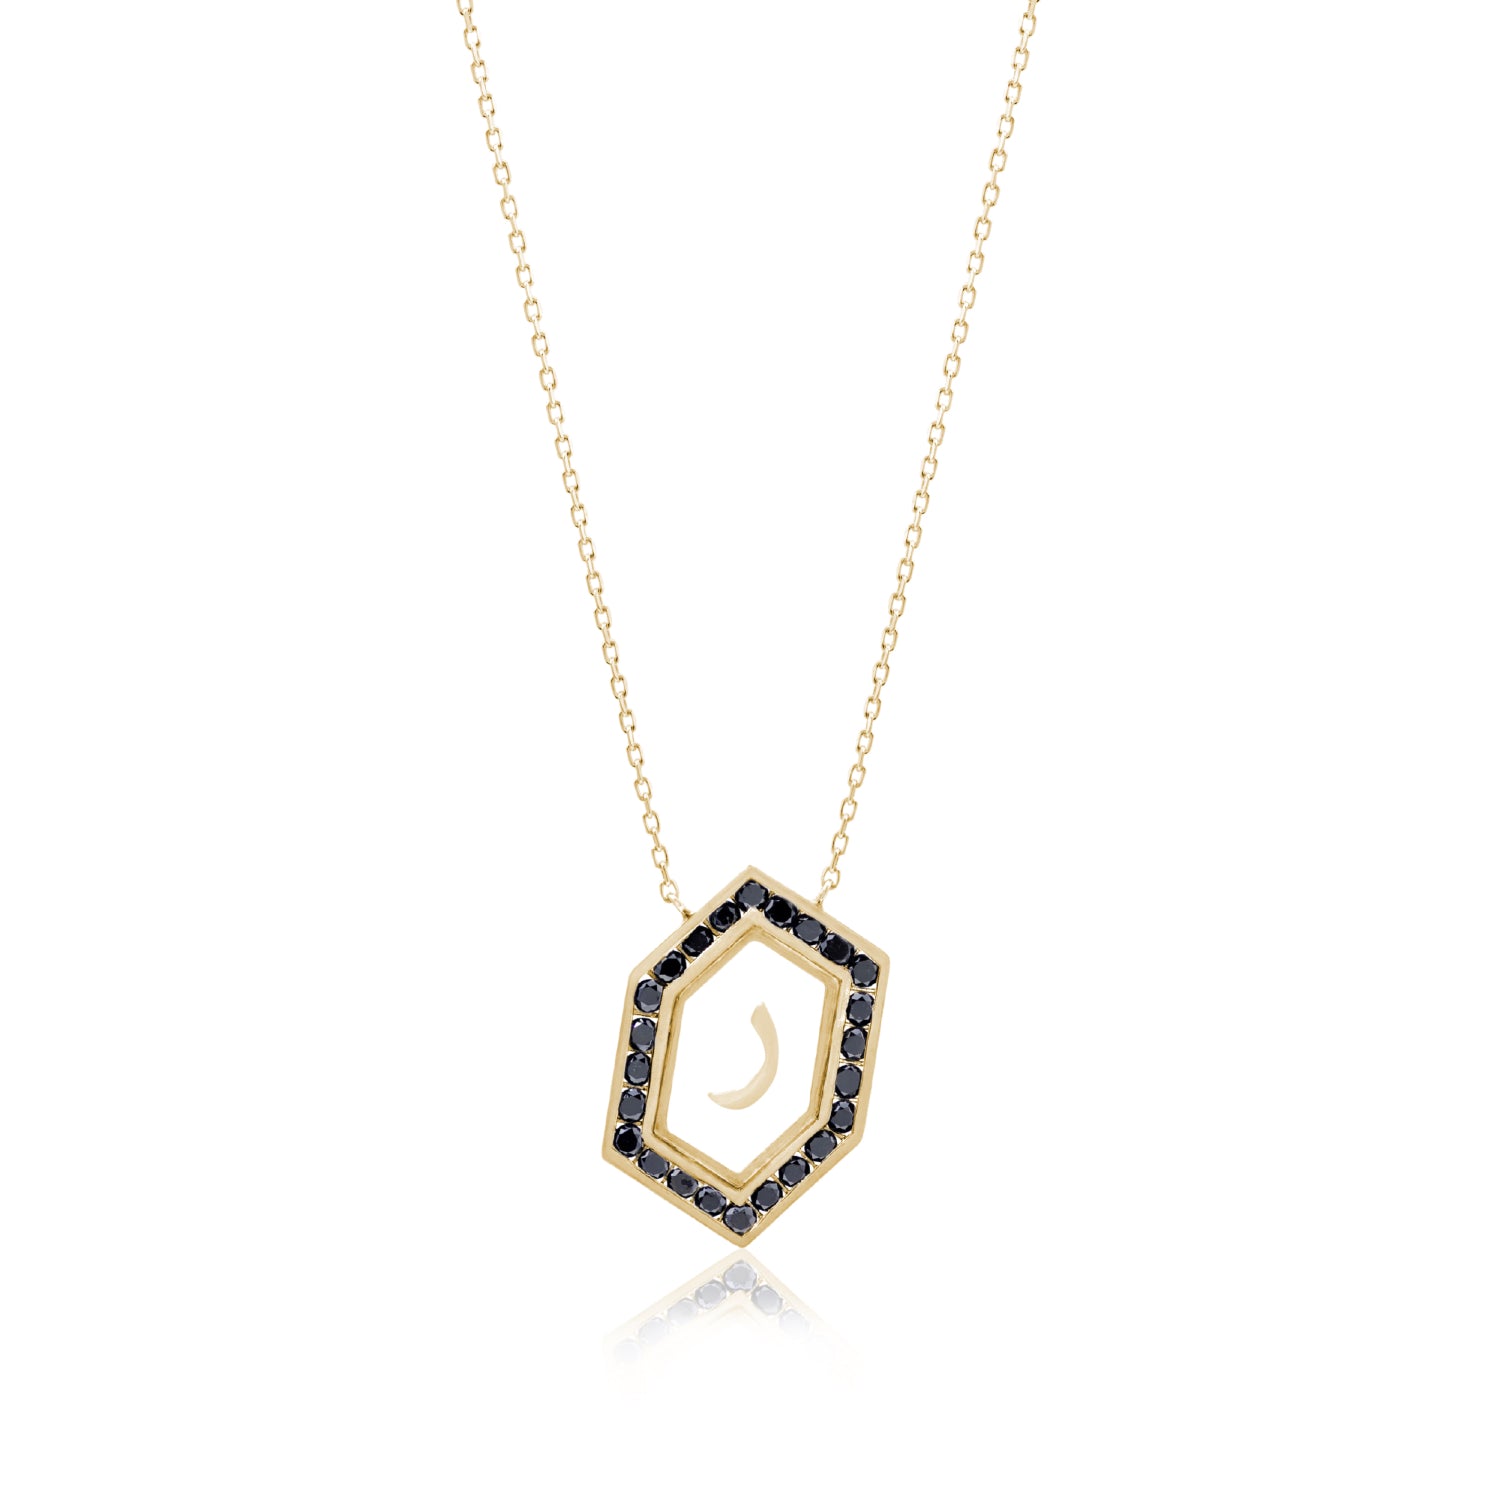 Qamoos 1.0 Letter ر Black Diamond Necklace in Yellow Gold